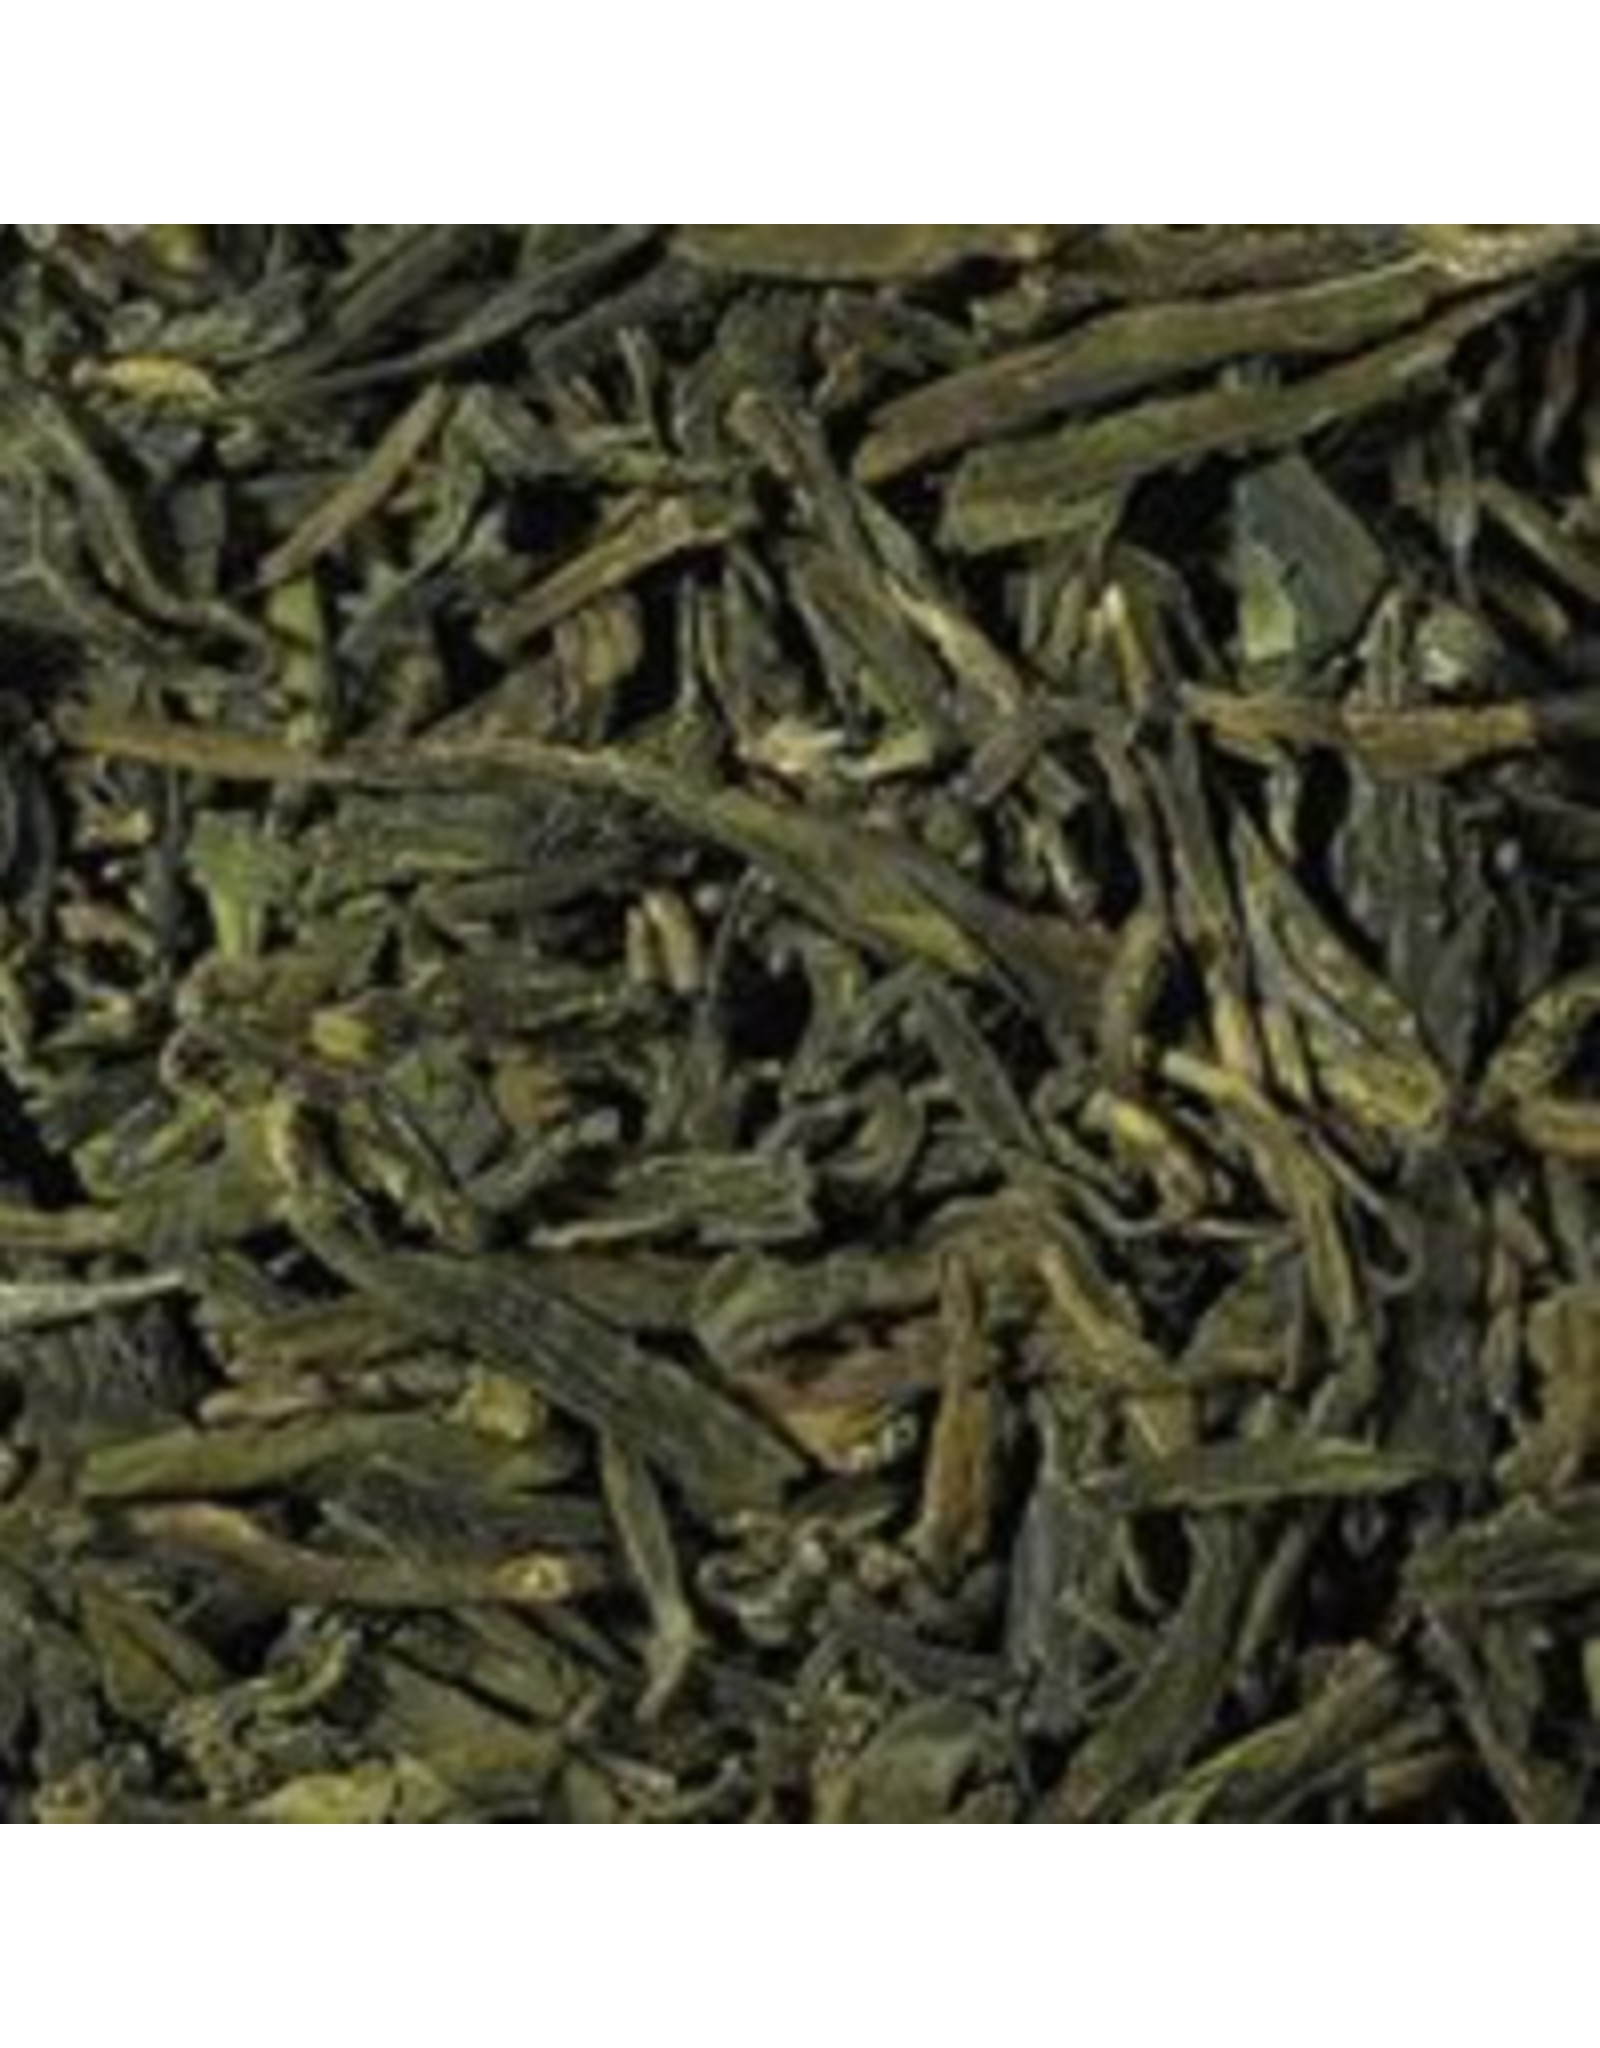 Tea from China Dragonwell/Lung Ching